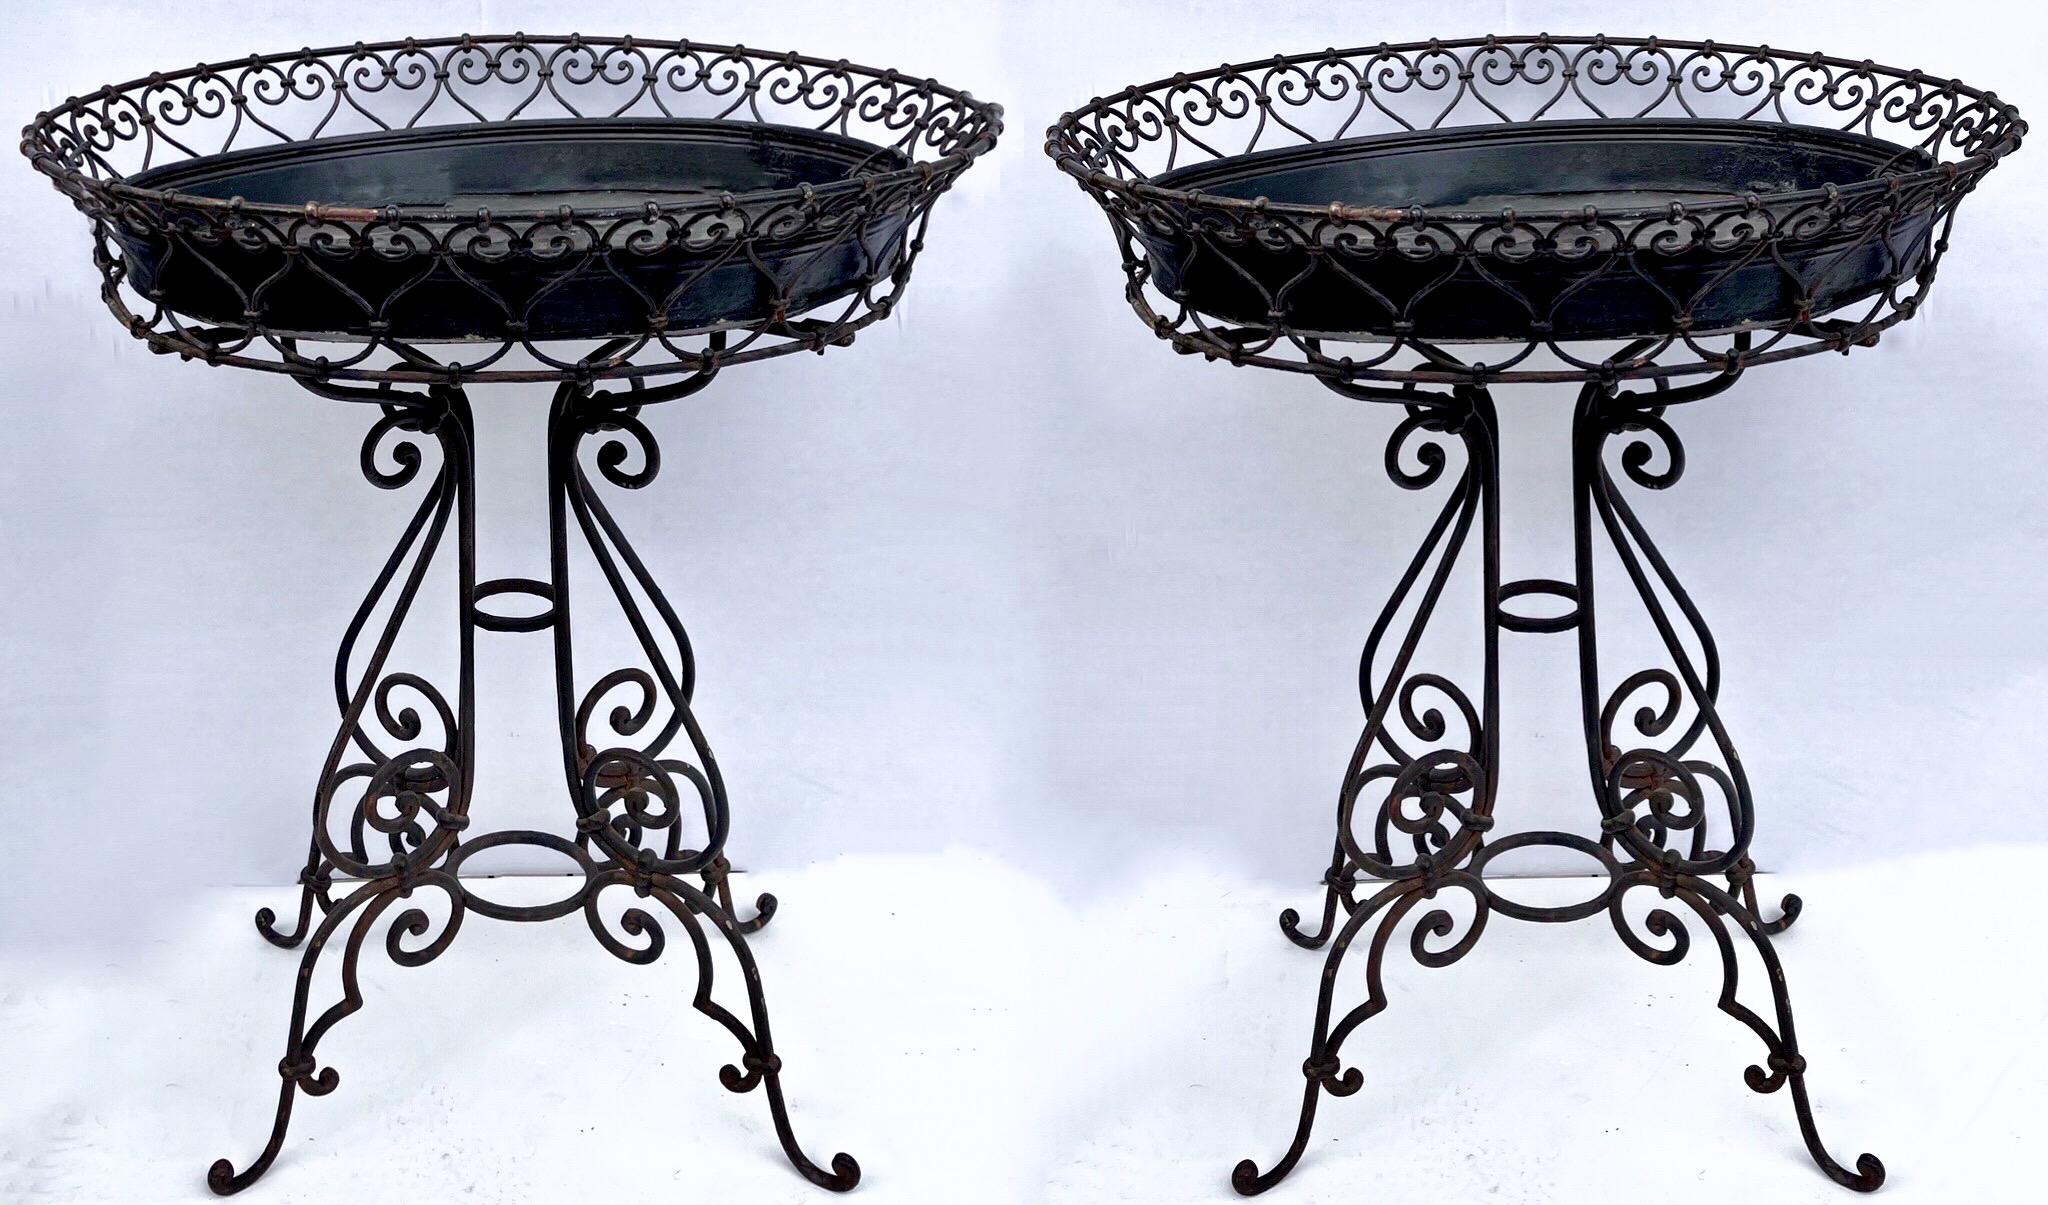 American Early 20th-C Black Scrolled Metal Jardinieres Planters or Plant Stand, Pair For Sale